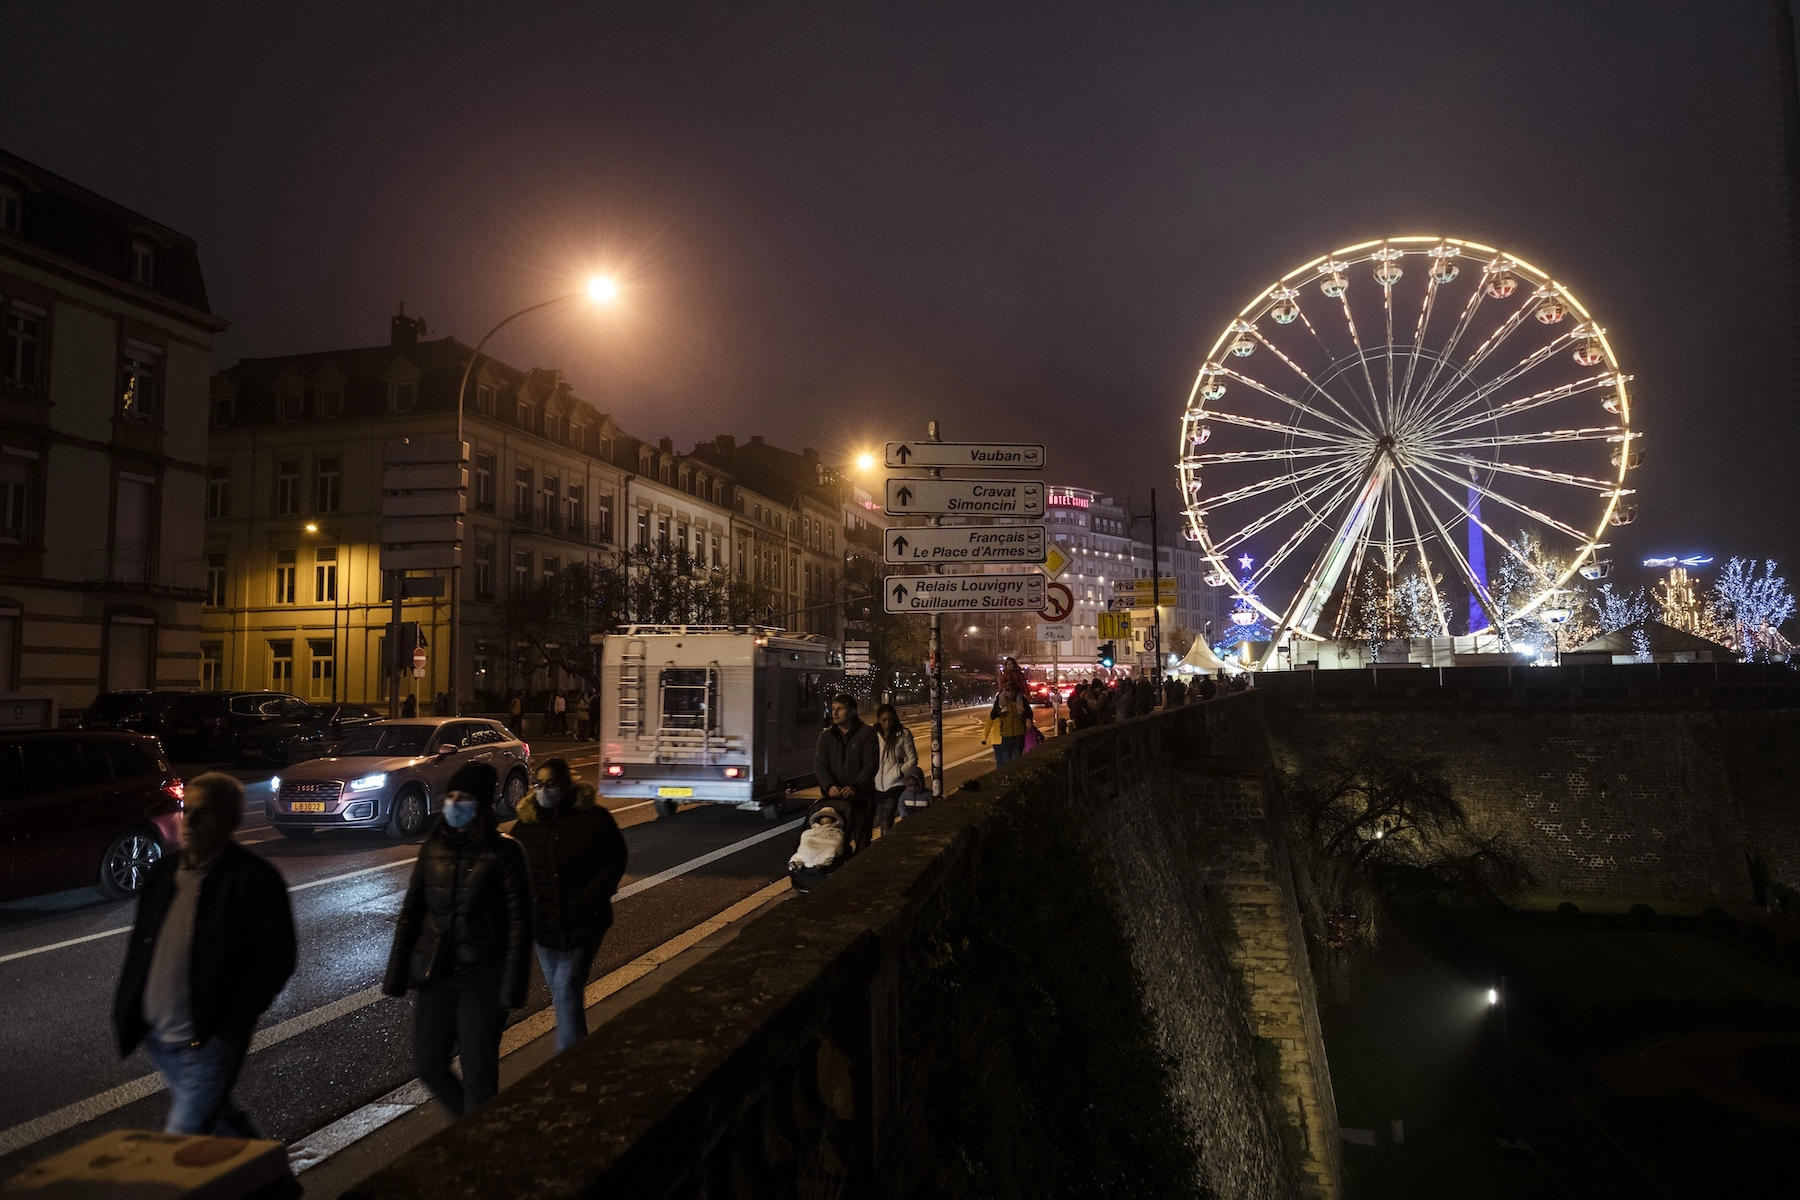 Pedestrians walk along the city walls of Luxembourg at night with the Christmas market lights and ferris wheel in the background